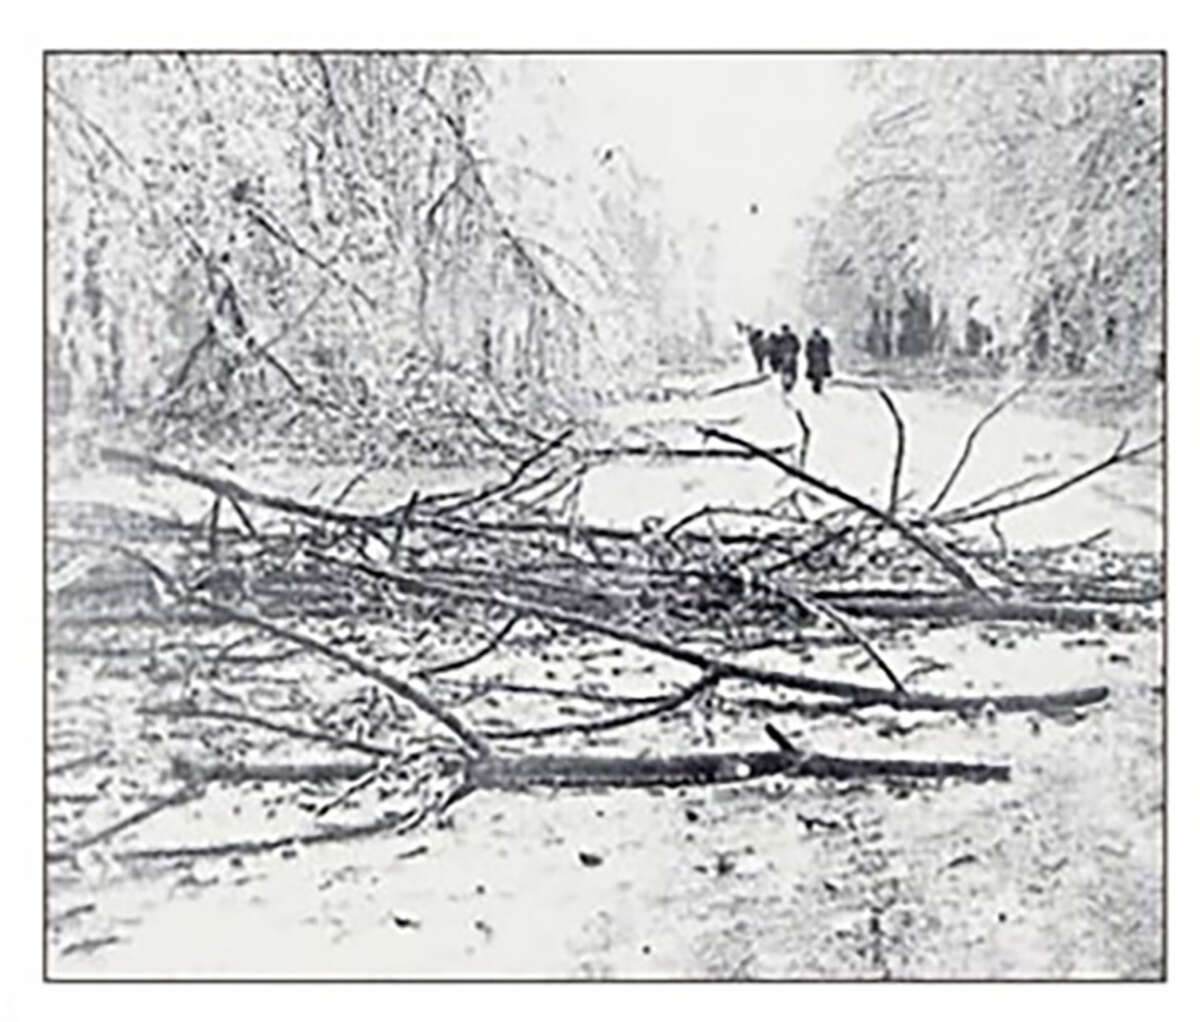 Pictured are images from the “Great Ice Storm” of Feb. 21-22, 1922, in Big Rapids.